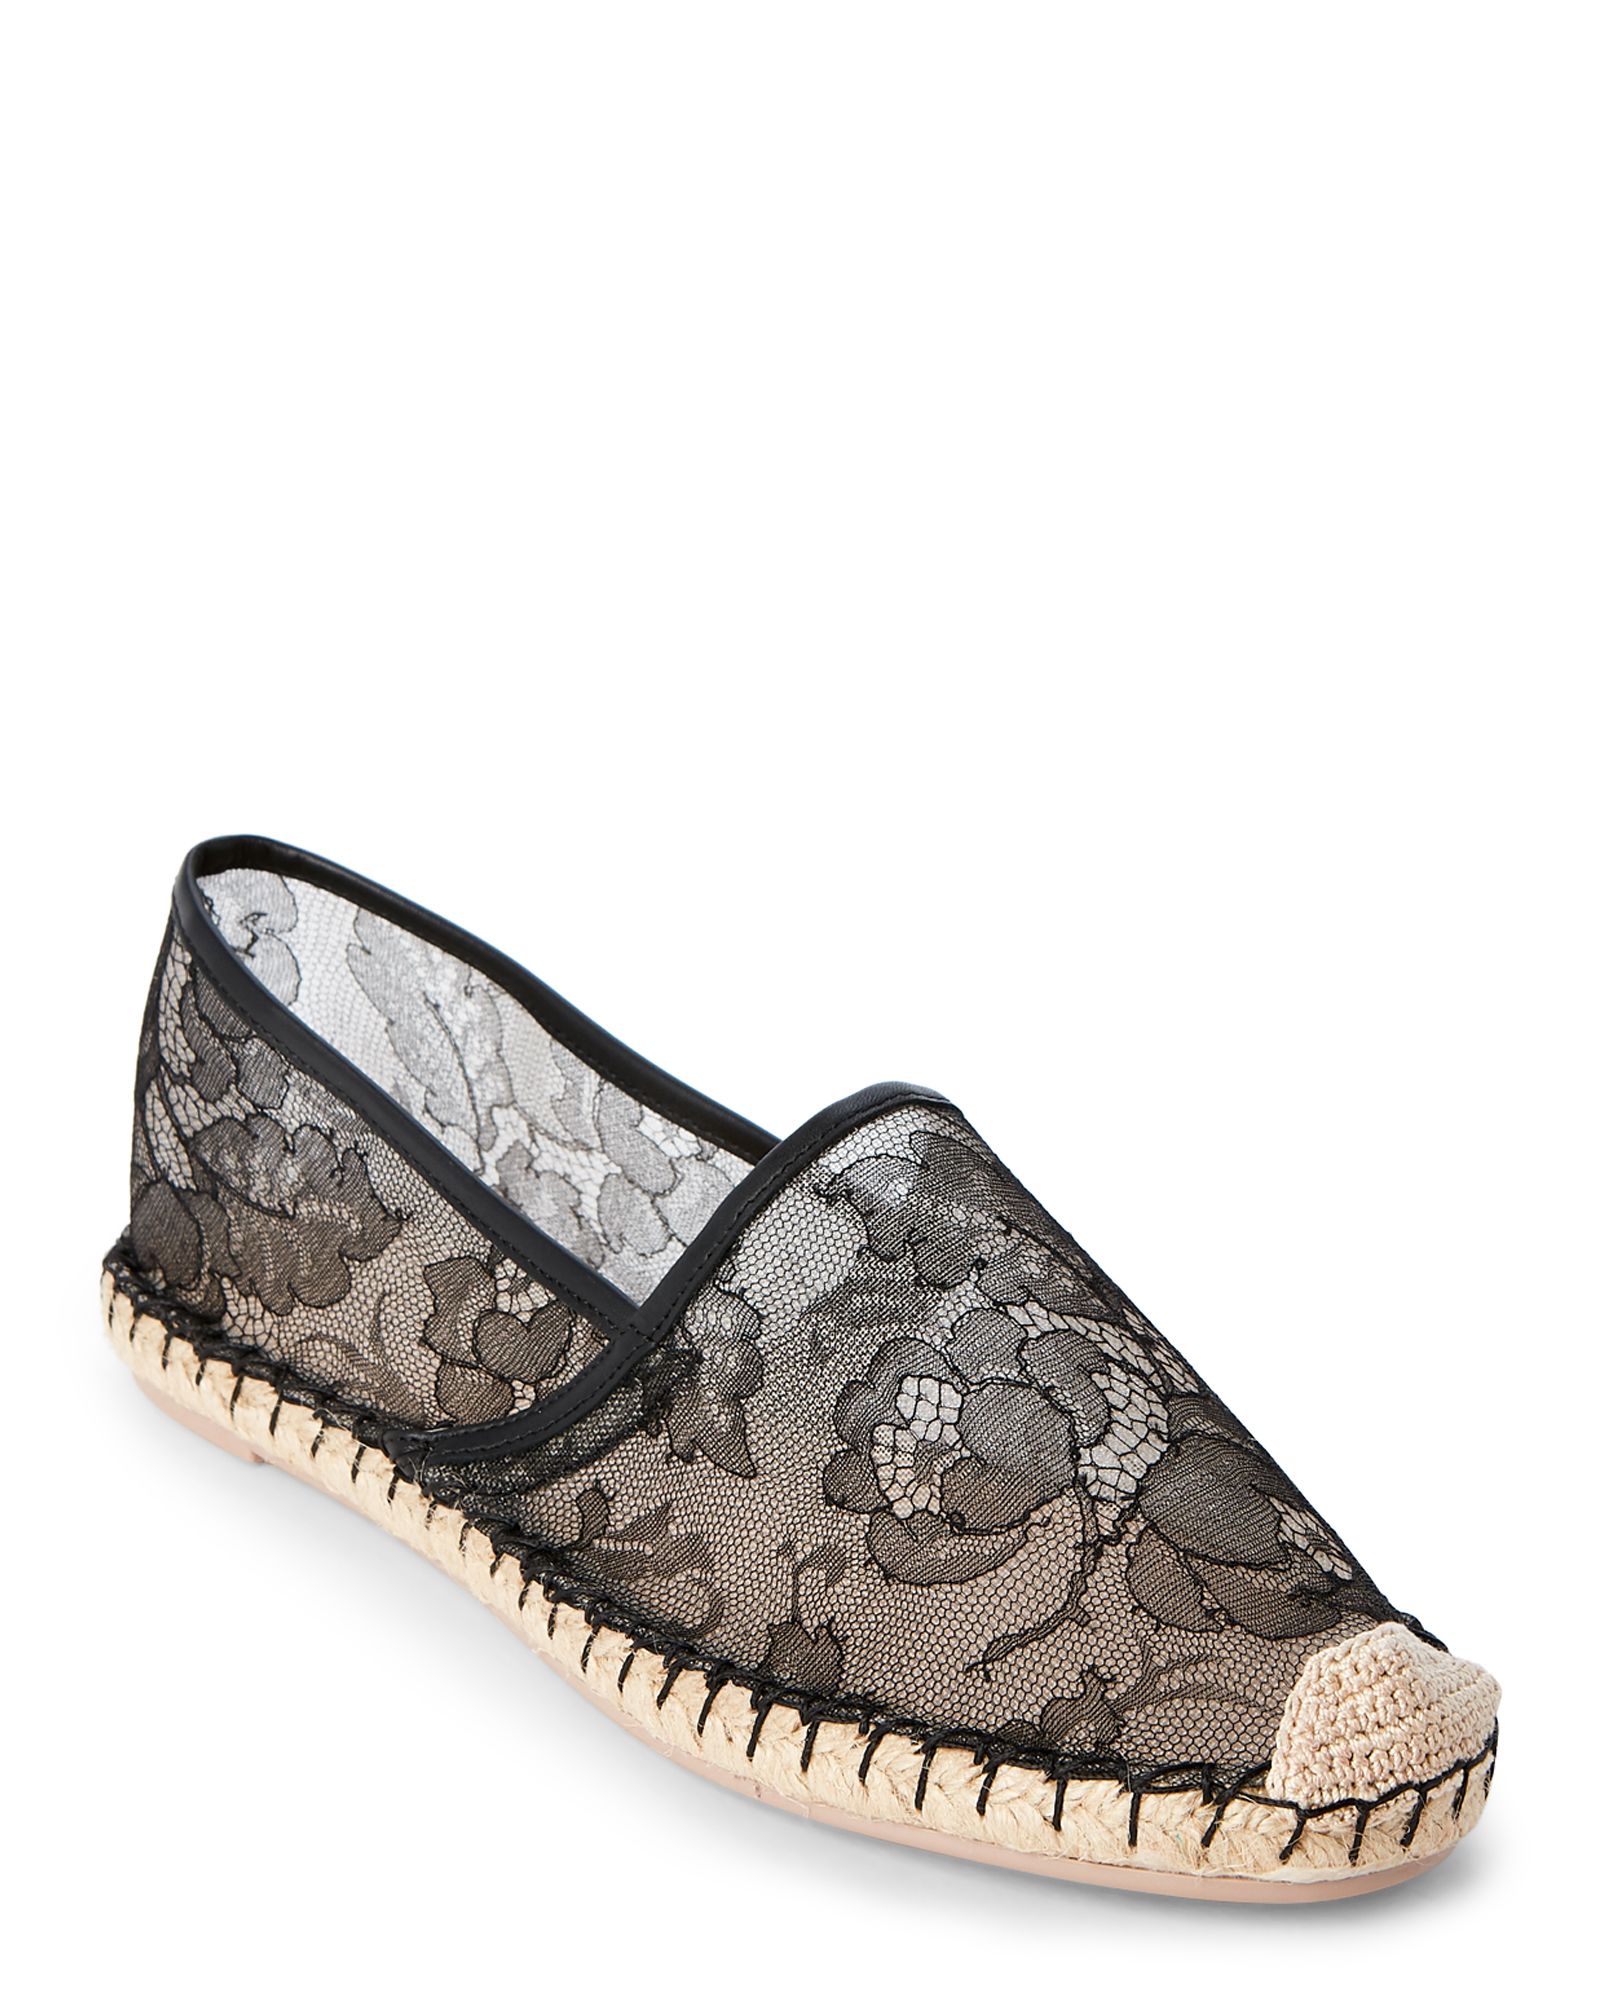 Valentino Chantilly Lace Espadrilles in Black — UFO More